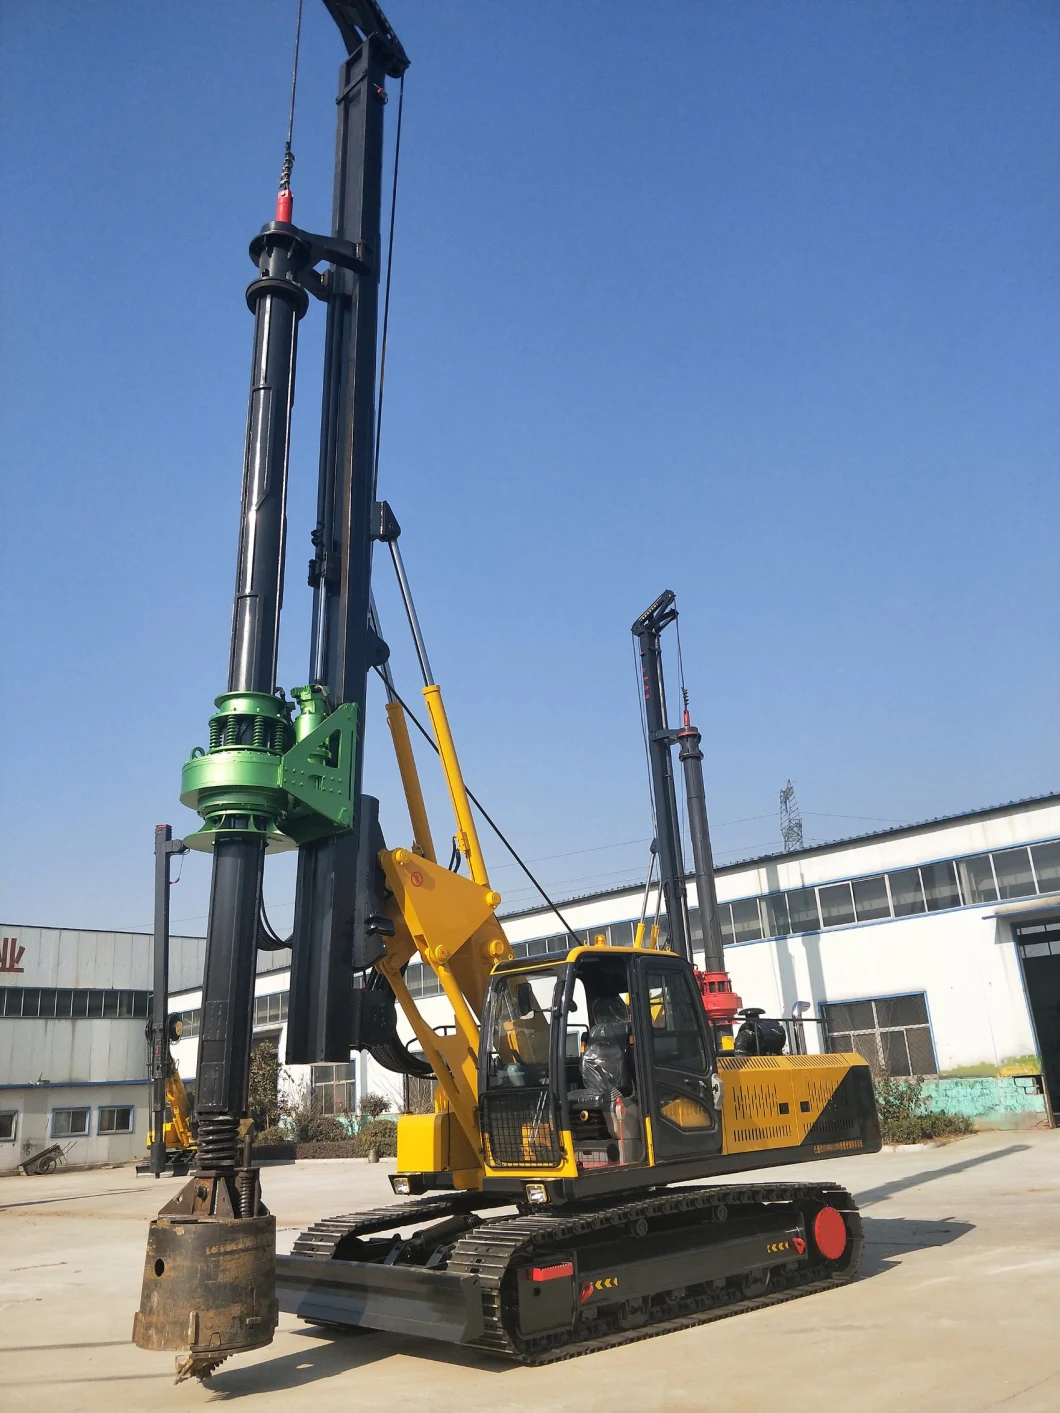 60m Drilling Depth Crawler Hydraulic Rotary Drill Rig for Construction of Houses, Roads, Bridges, Water Conservancy, Et